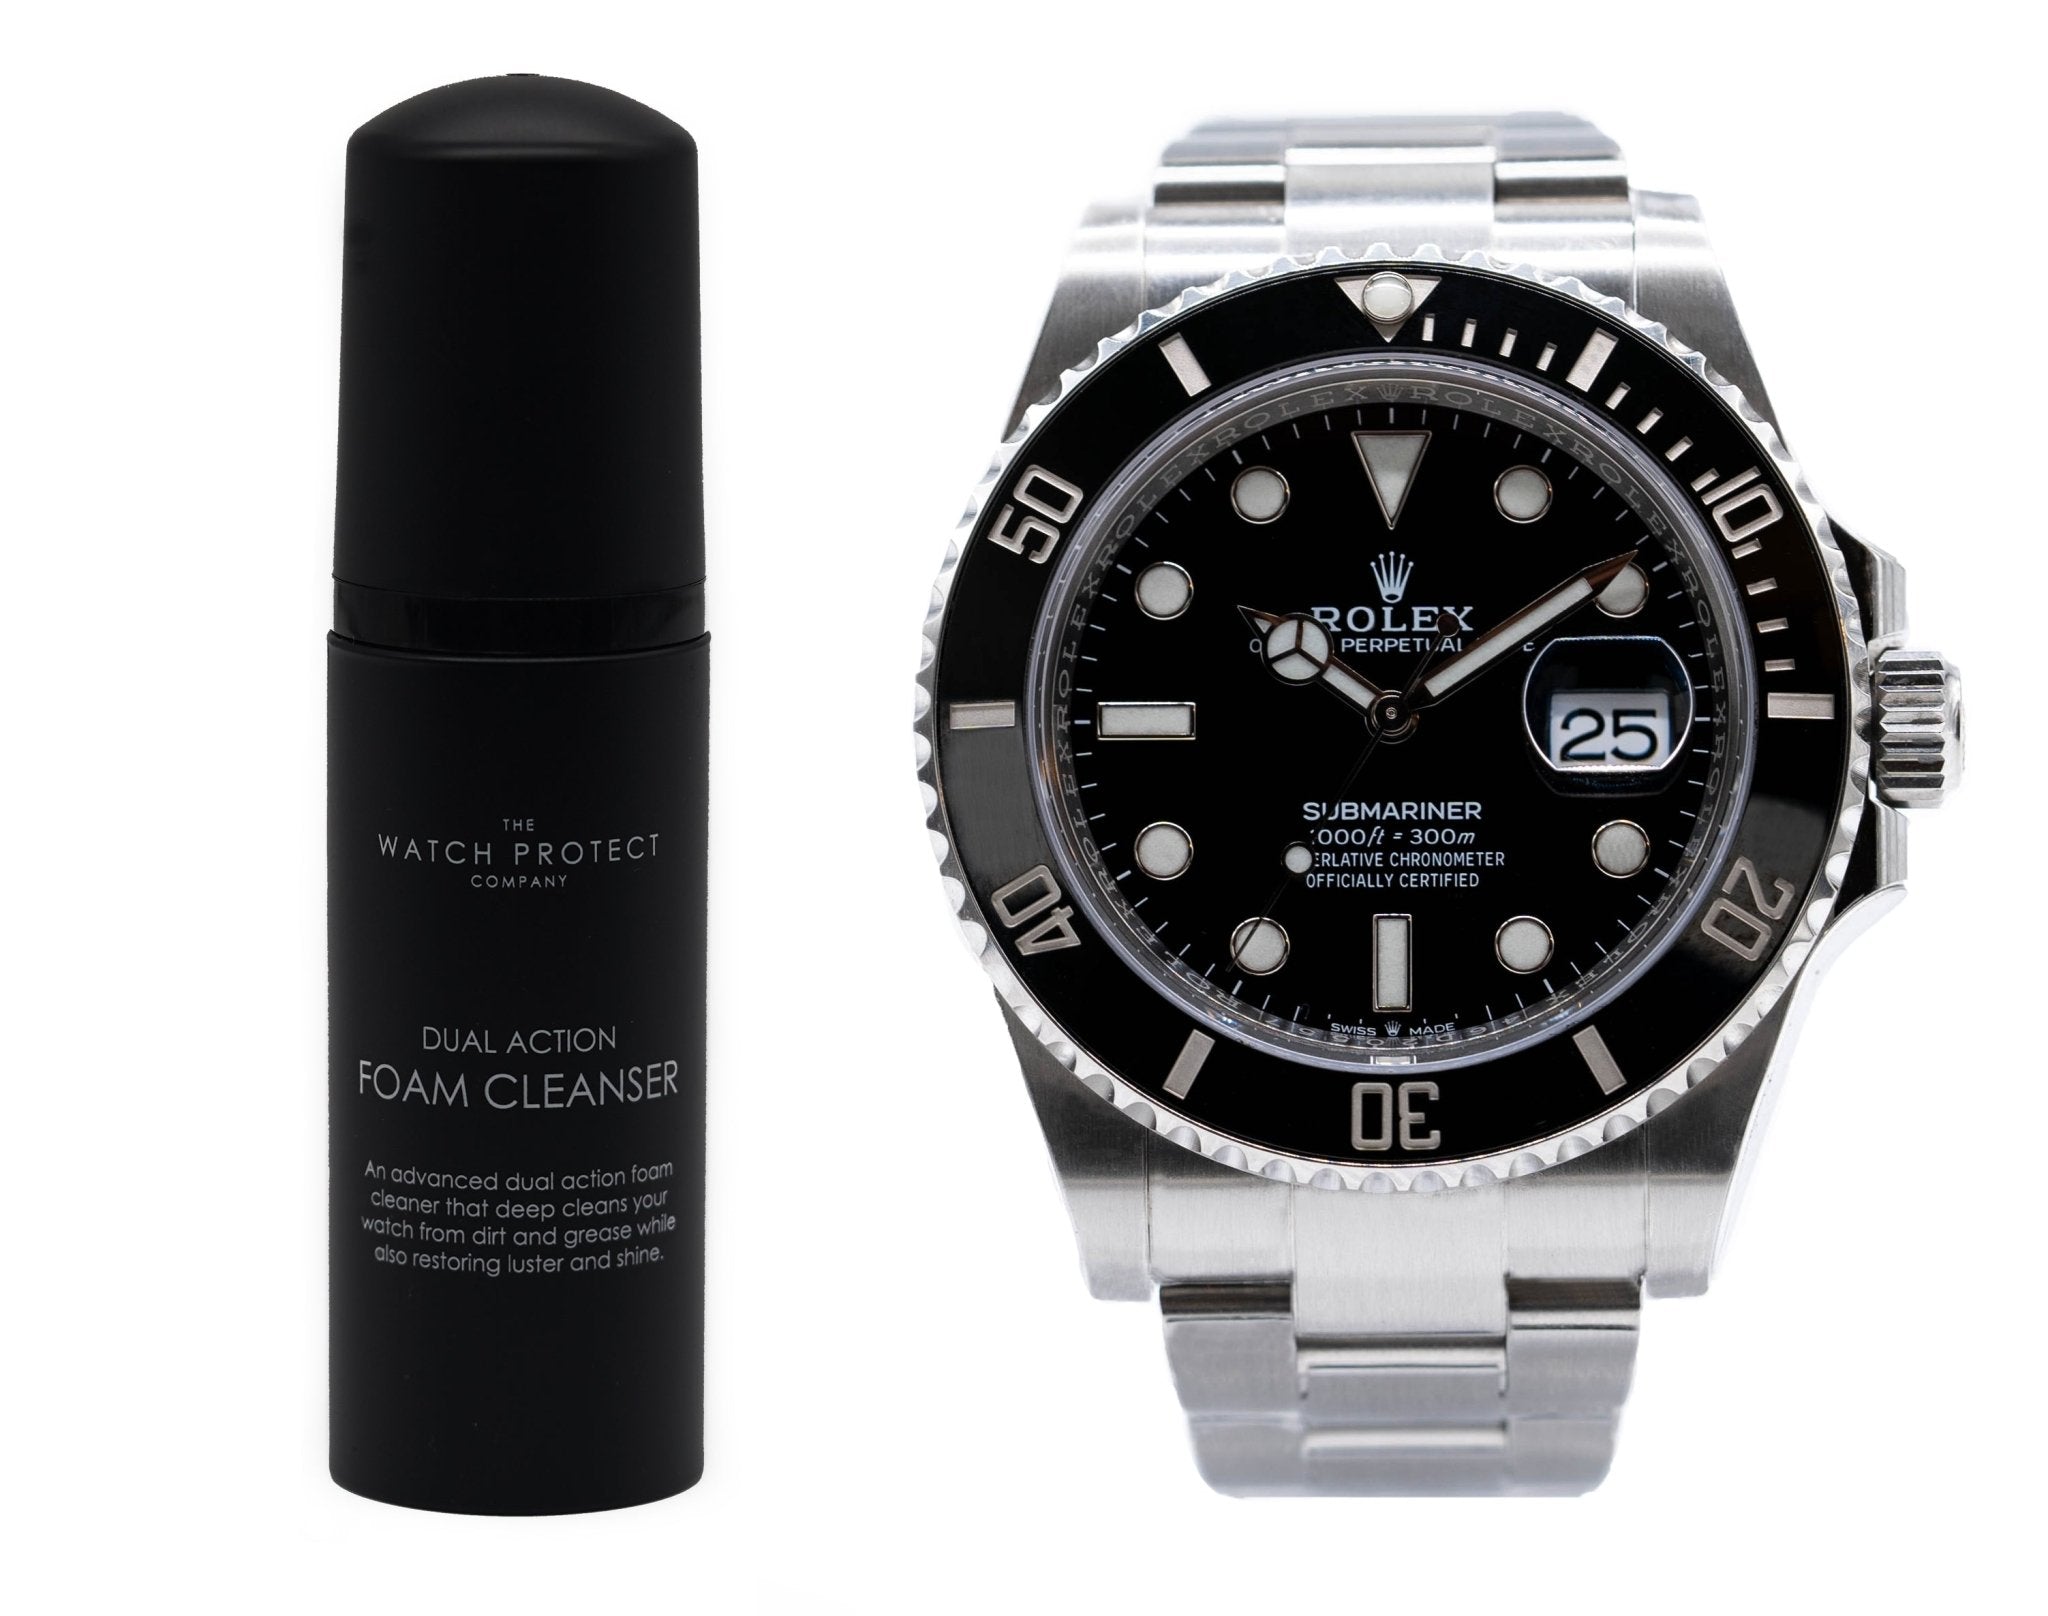 DUAL ACTION FOAM CLEANER & ROLEX SUBMARINER 124060/126610 - TIER 3 - WATCH PROTECTION KIT BUNDLE - The Watch Protect Company